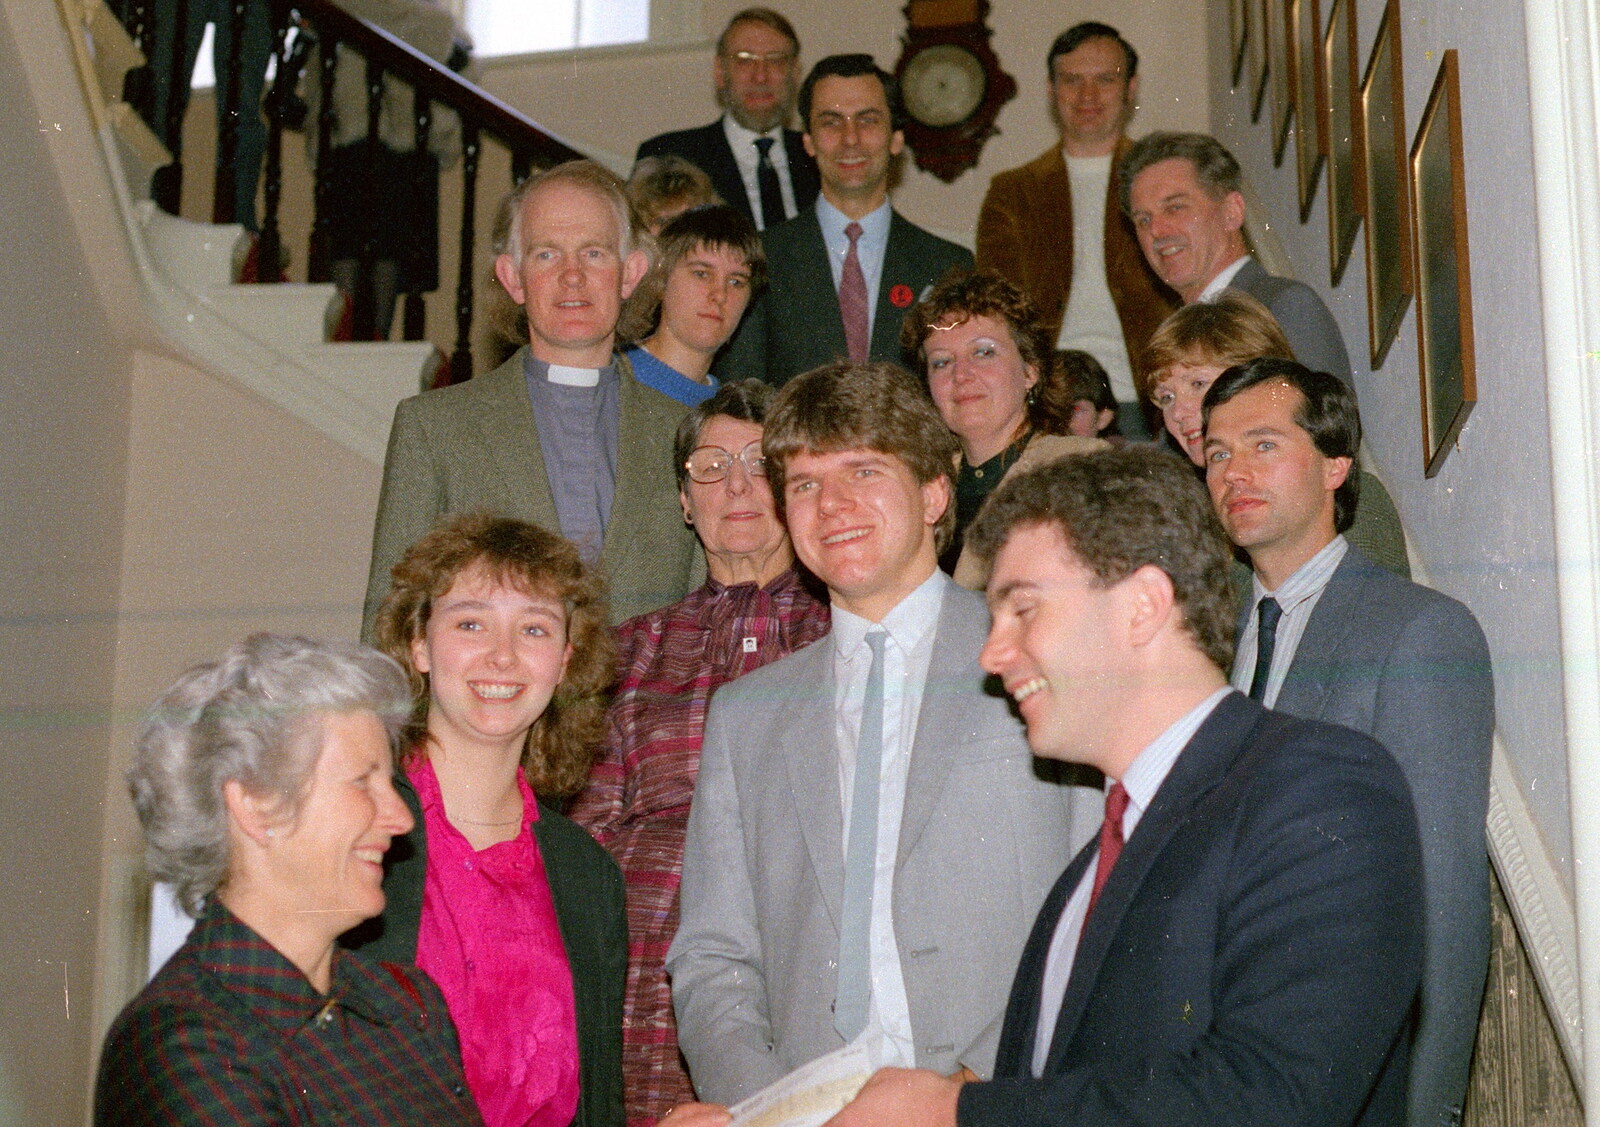 Another cheque photo from Uni: Student Politics, and Hanging Around The Hoe, Plymouth - 12th April 1986